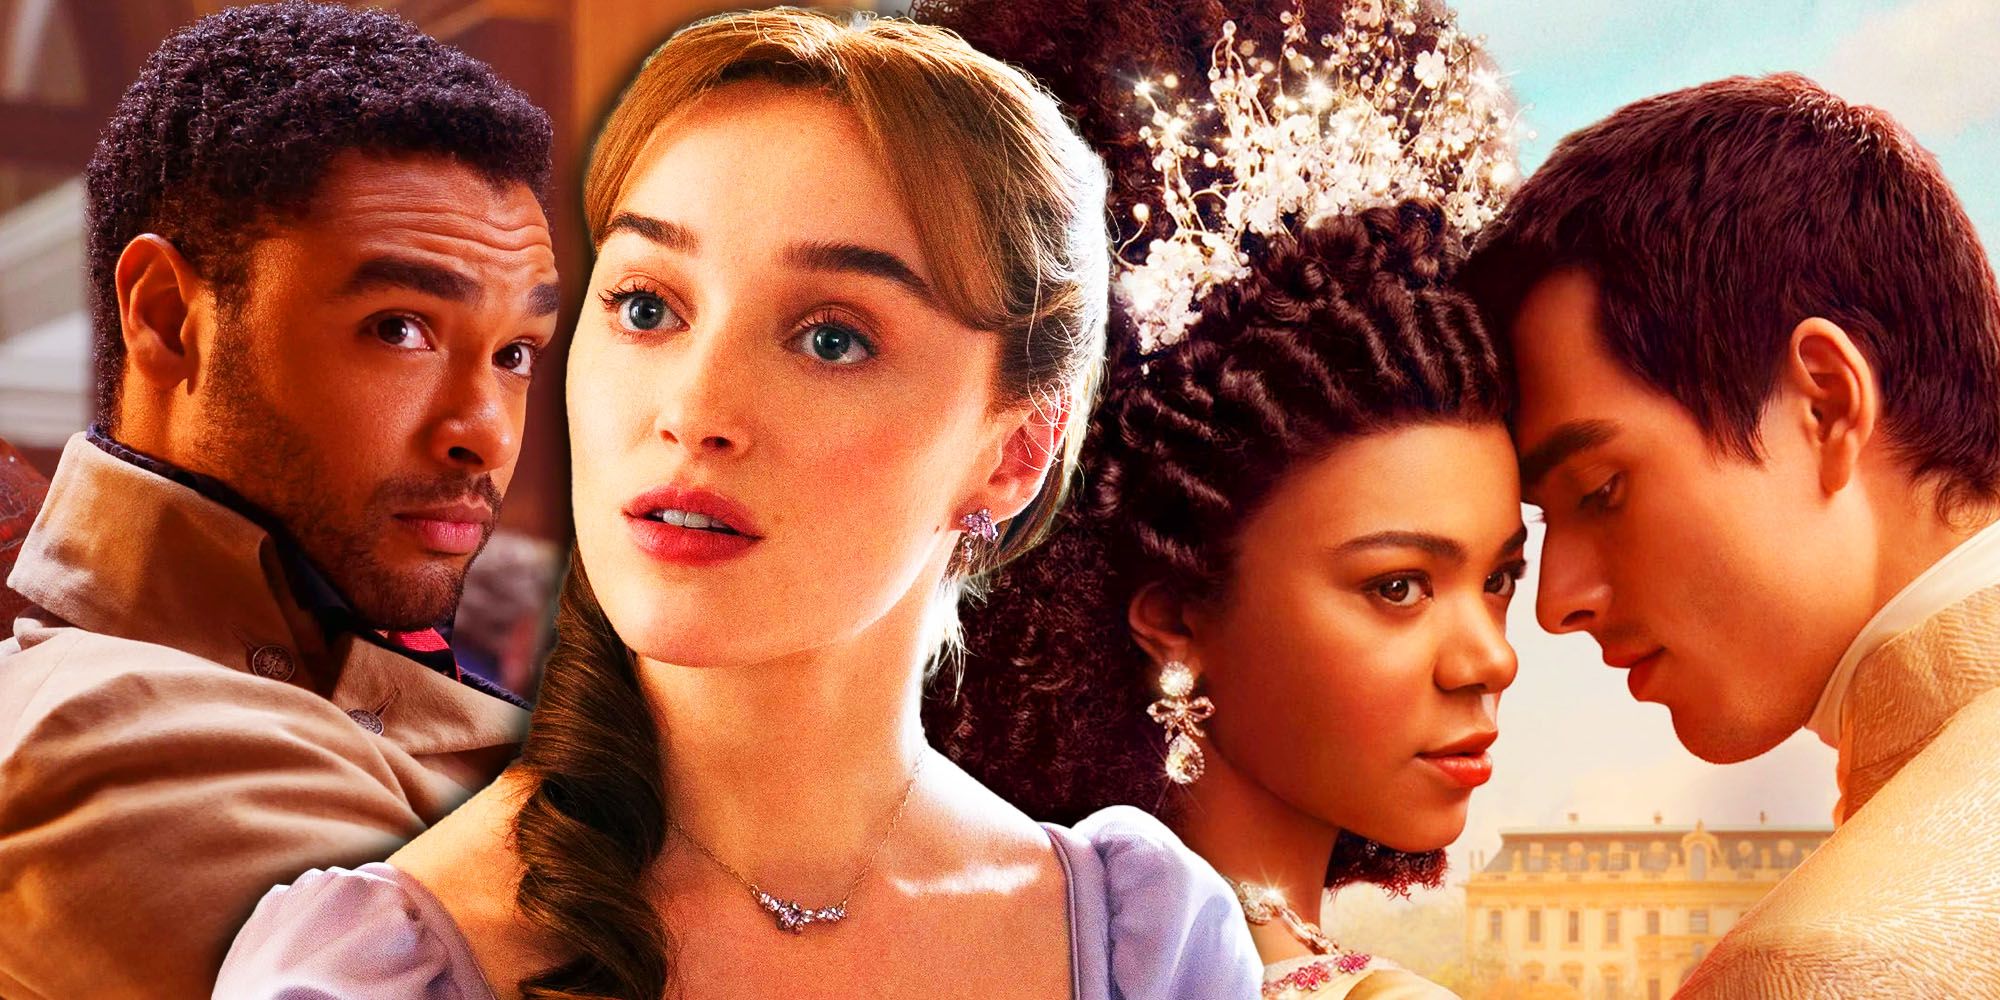 Bridgerton and the 5 most romantic Netflix originals of all time as of  2023, ranked